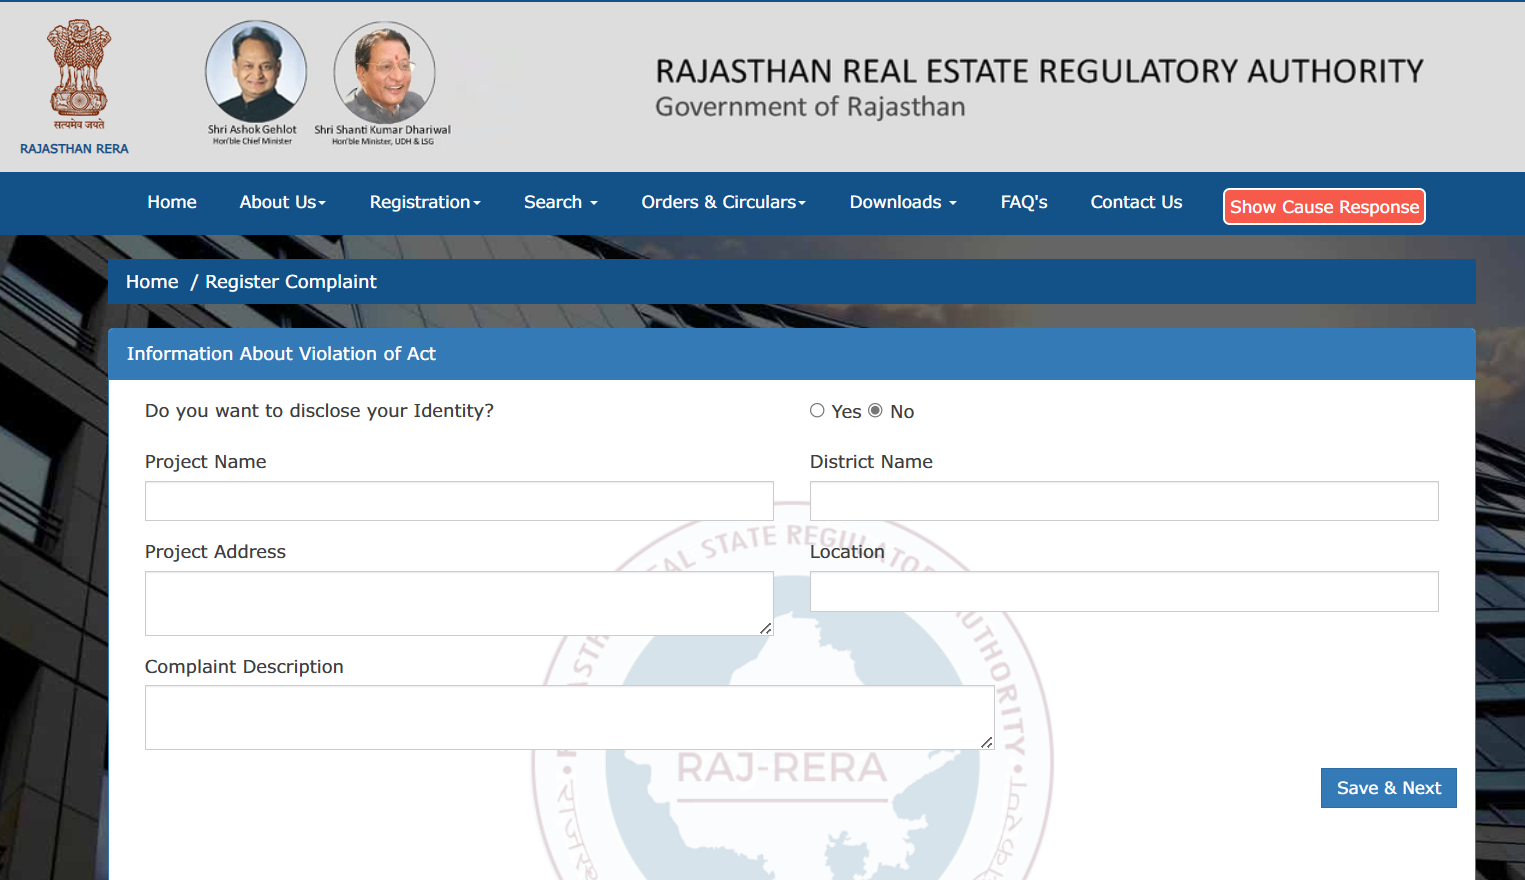 Filing Complaint on RERA Rajasthan: Your Key to Swift Real Estate Issue Resolution